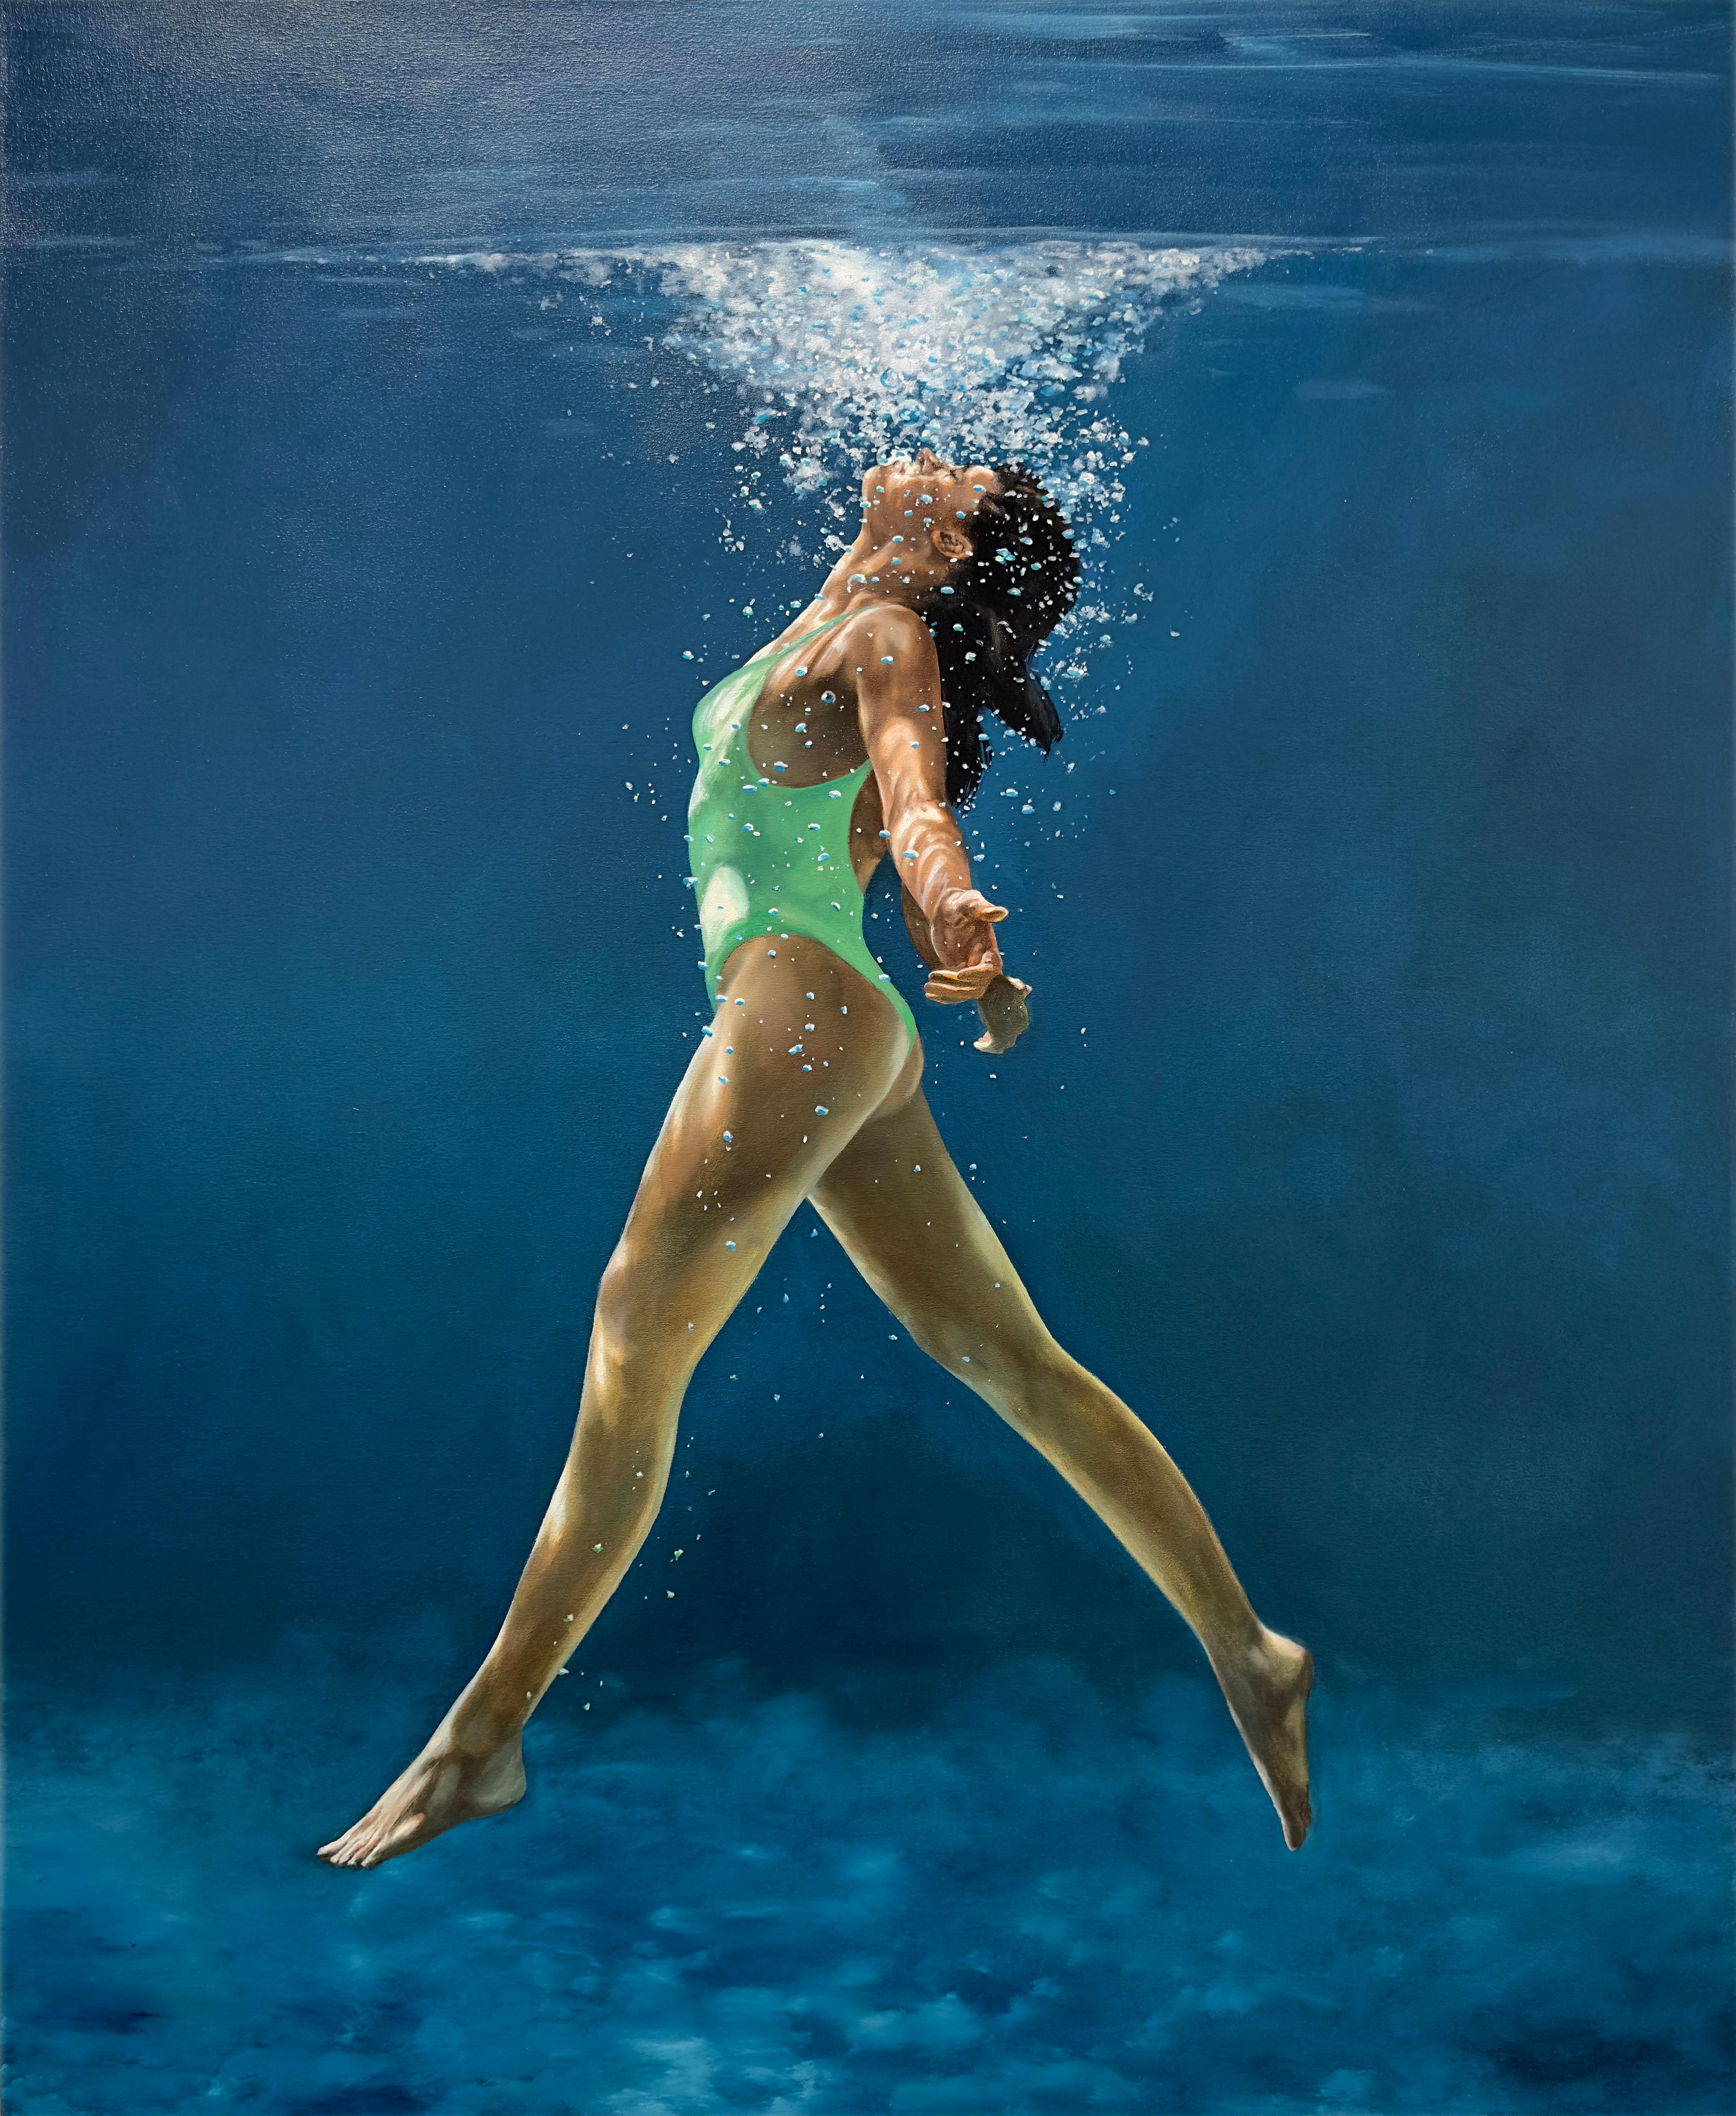 Eric Zener Figurative Painting - WATER DANCE - Contemporary Realism / Figurative / Swimmer / Blue